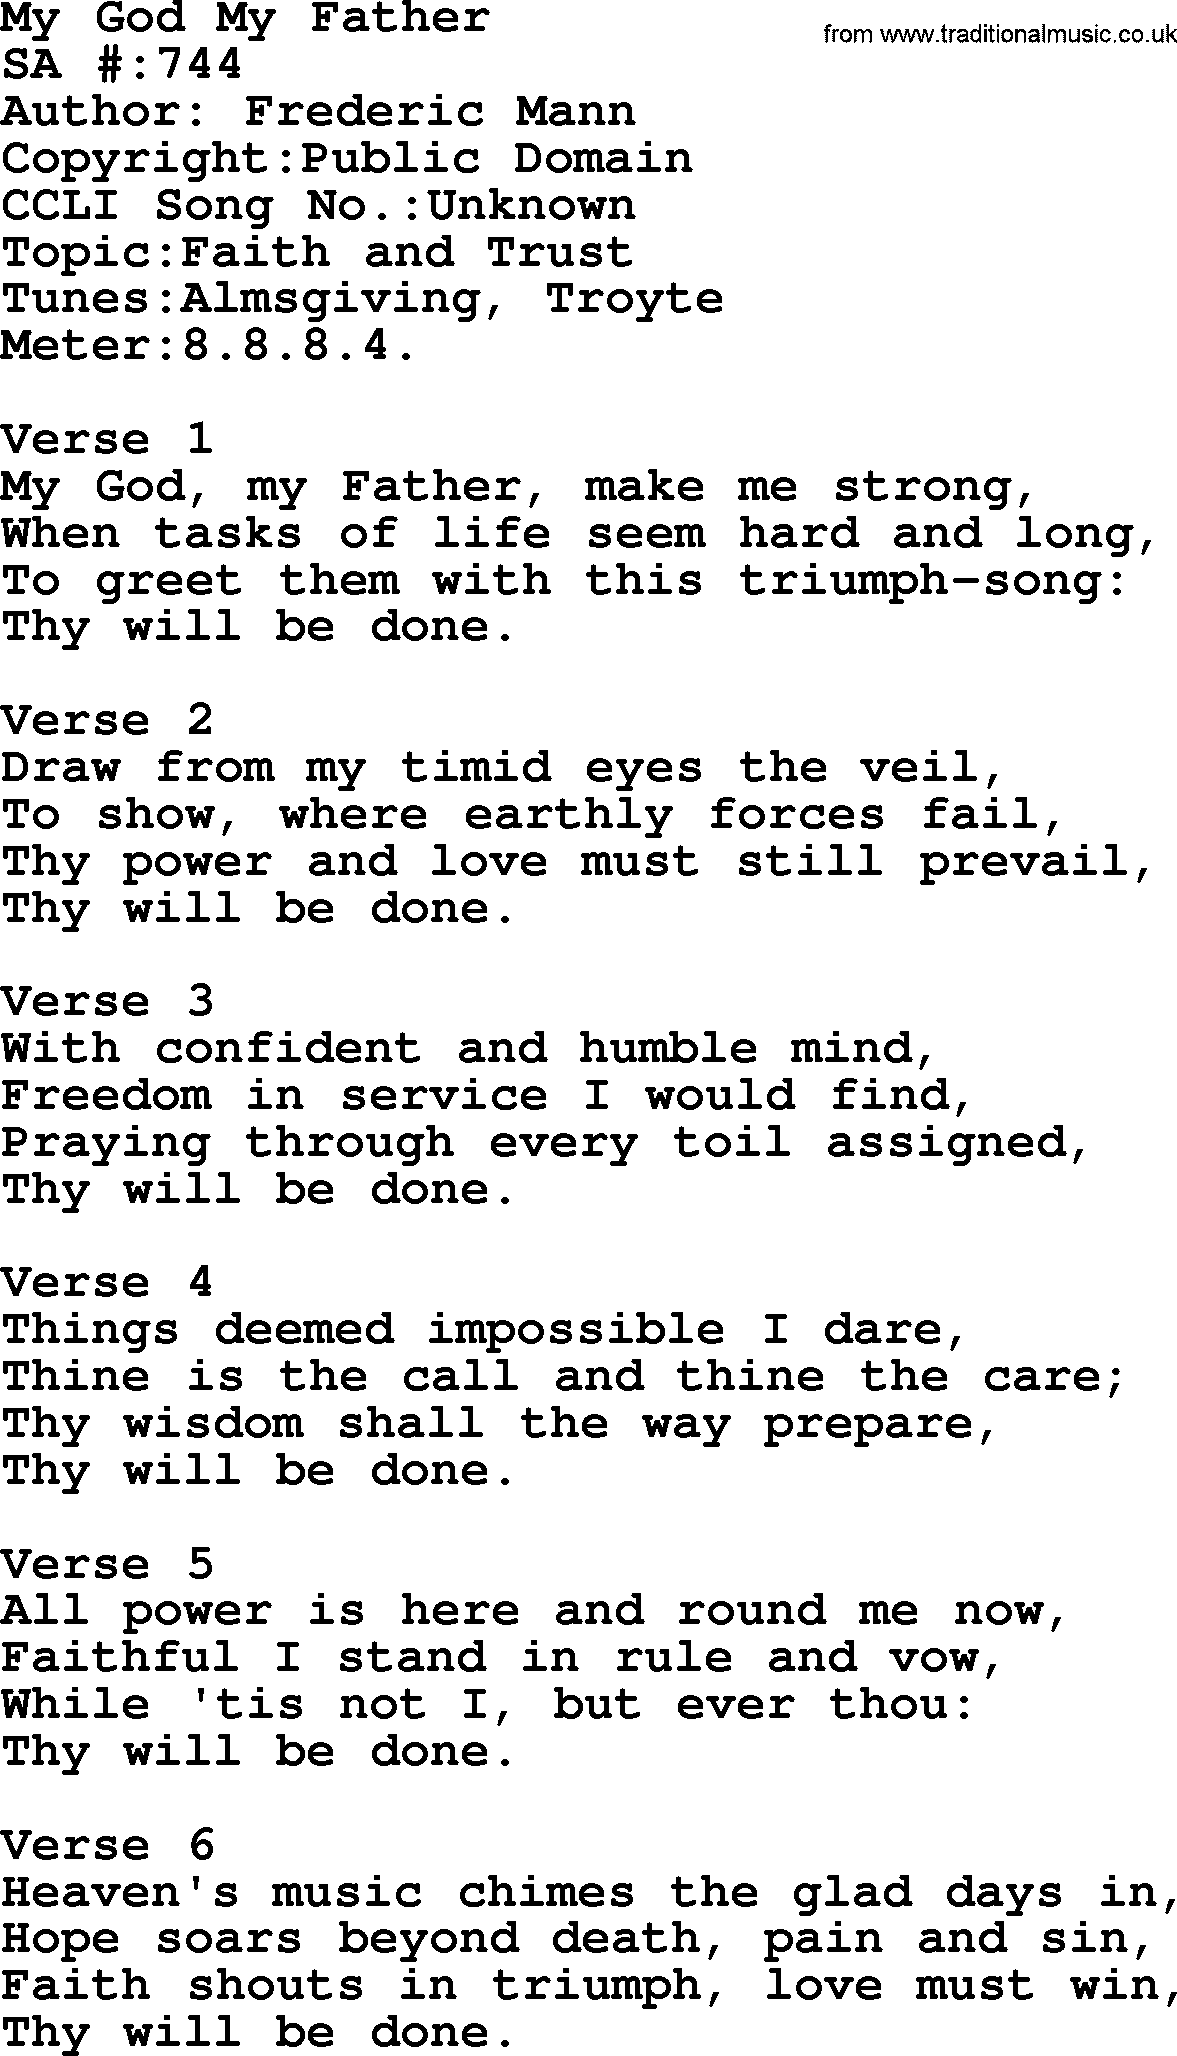 Salvation Army Hymnal, title: My God My Father, with lyrics and PDF,